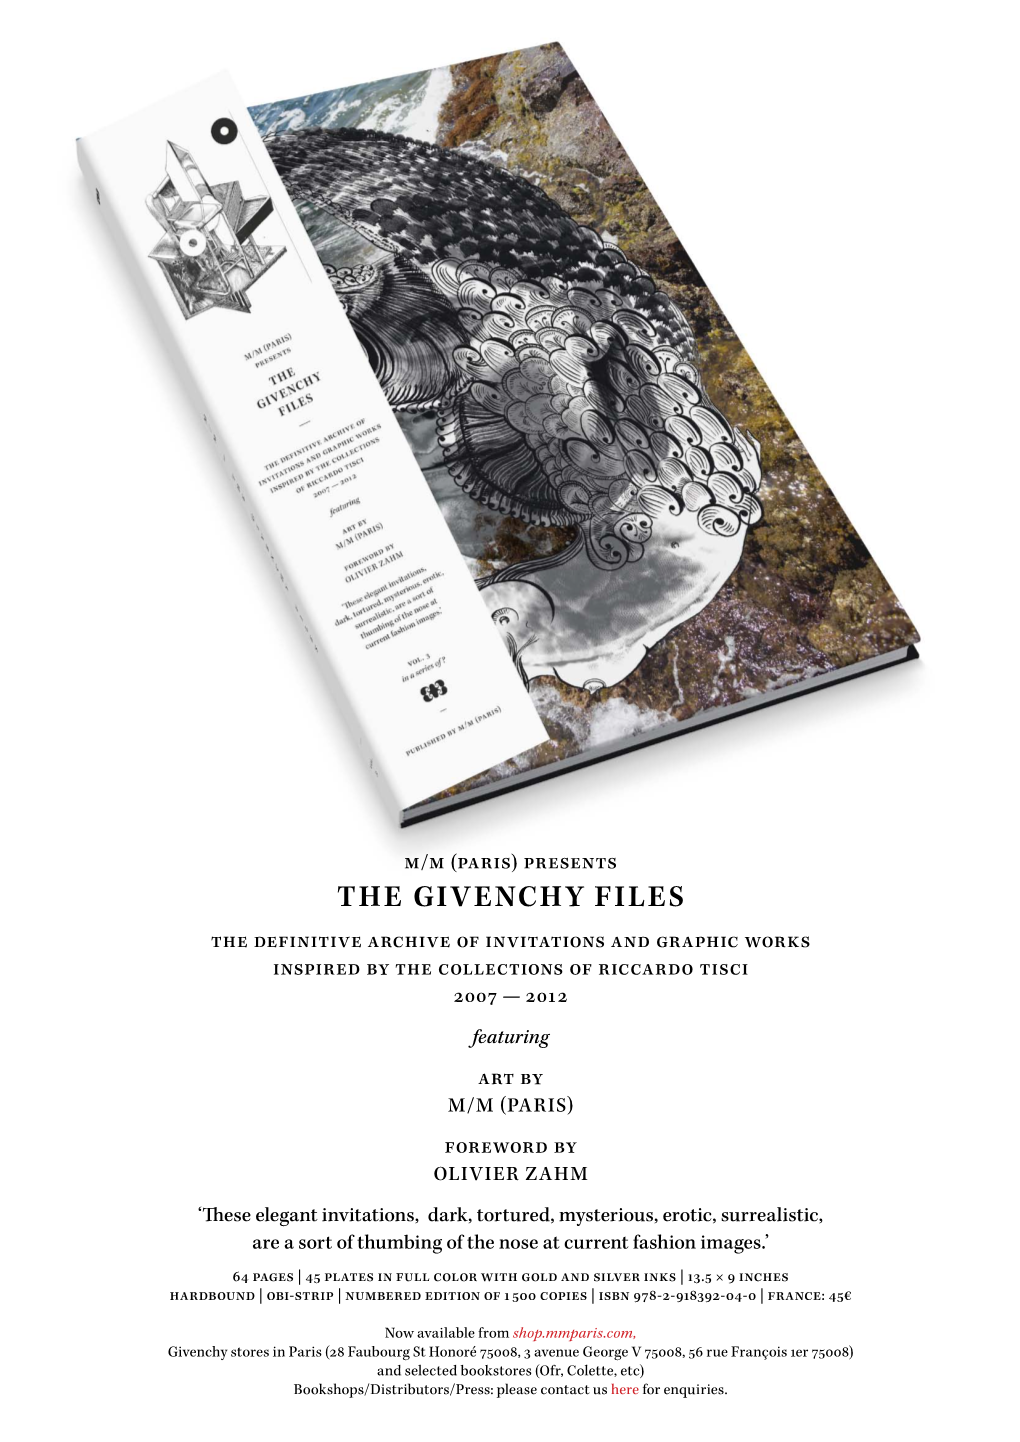 THE GIVENCHY FILES the Definitive Archive of Invitations and Graphic Works Inspired by the Collections of Riccardo Tisci 2007 — 2012 Featuring